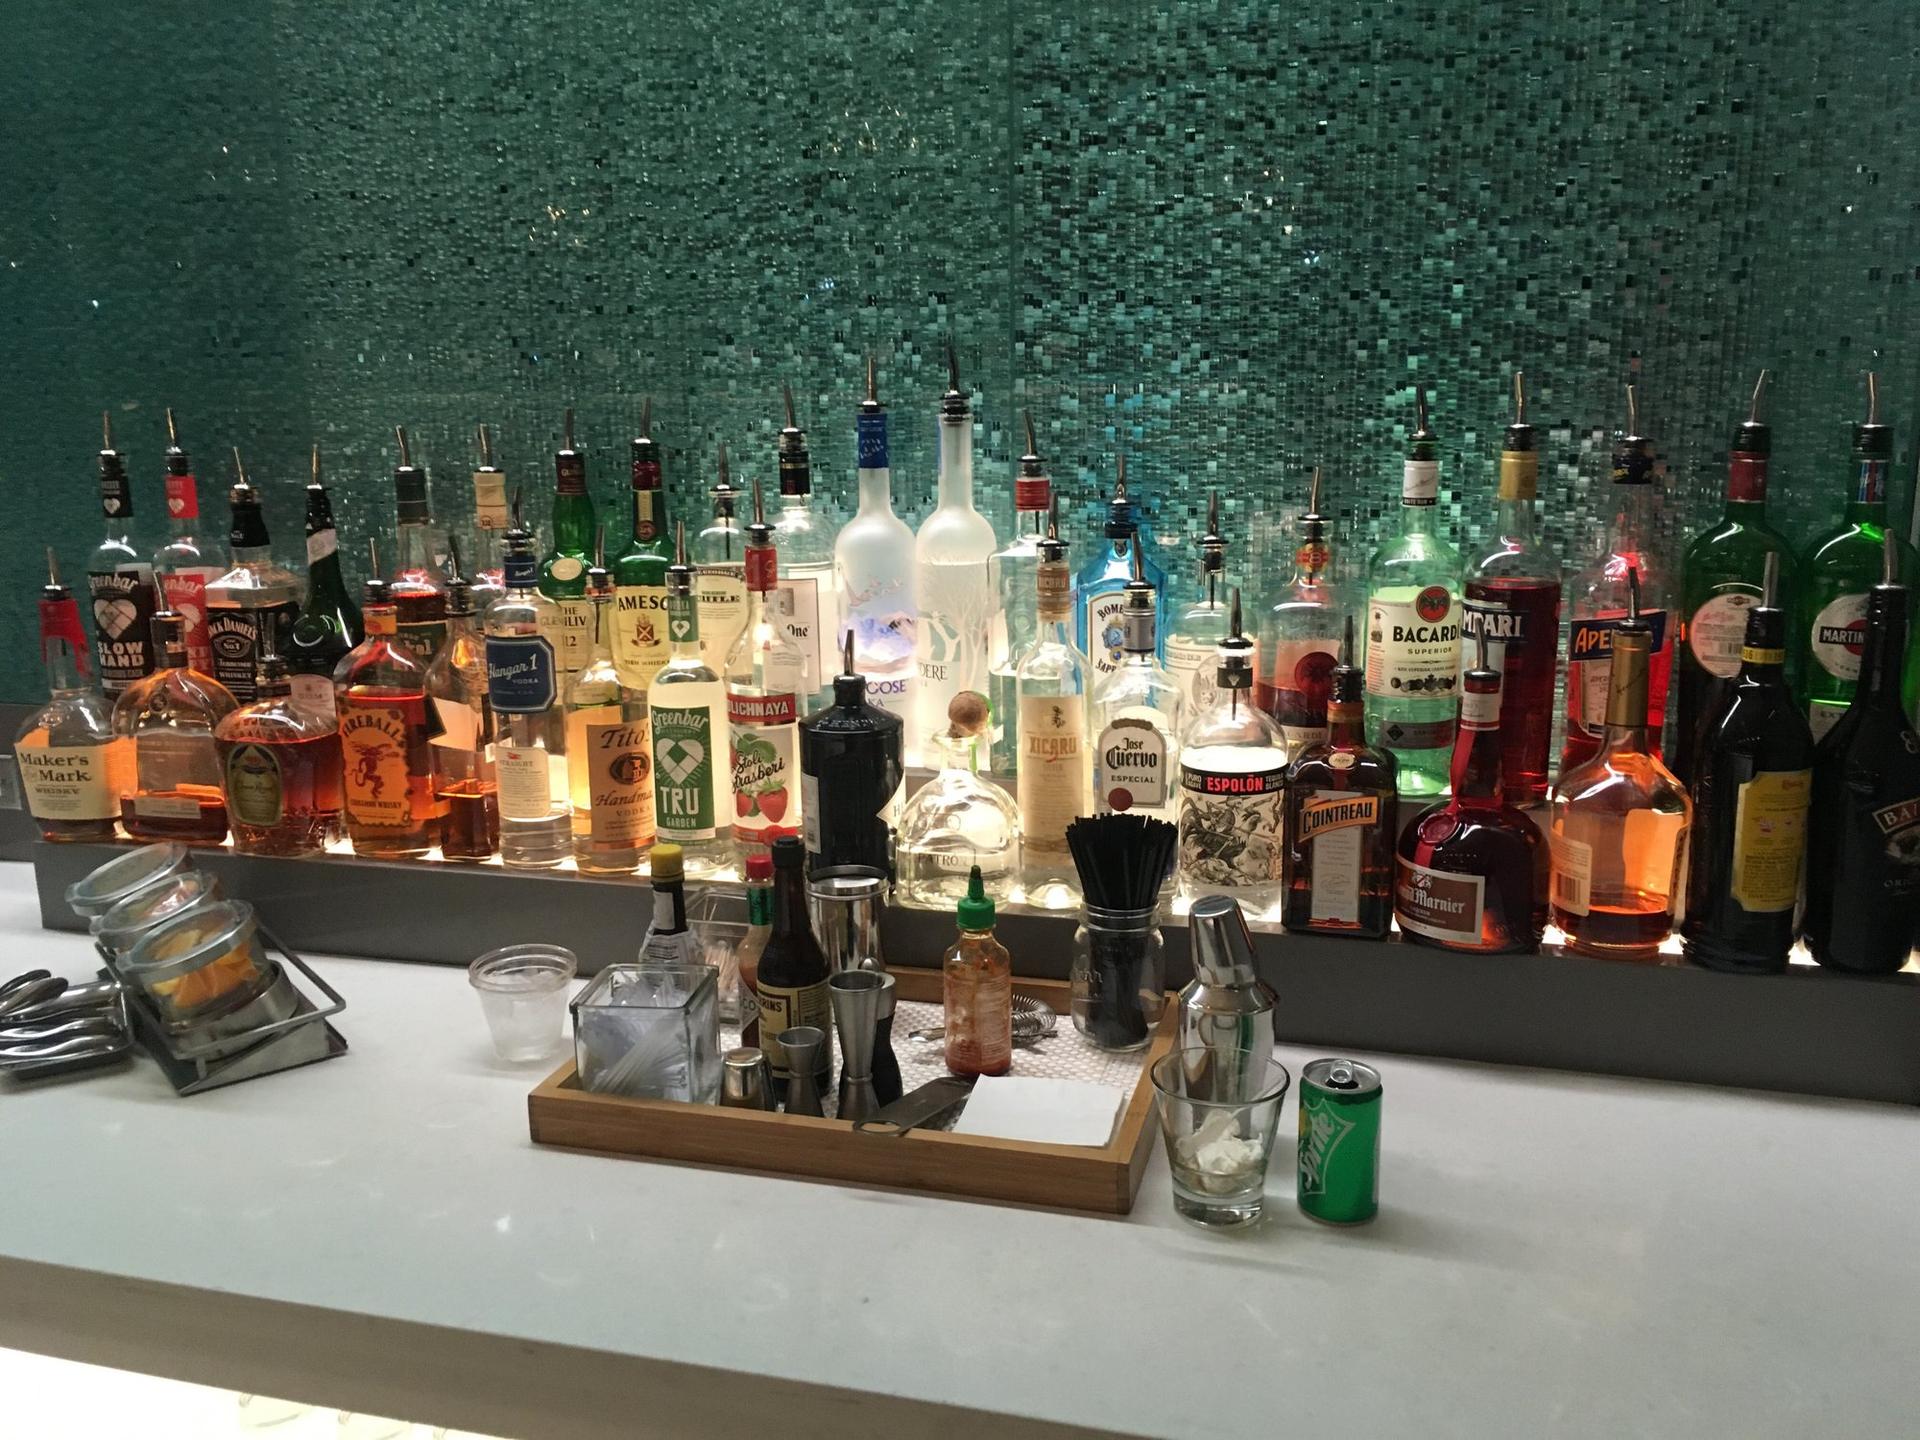 American Airlines Flagship Lounge image 25 of 65